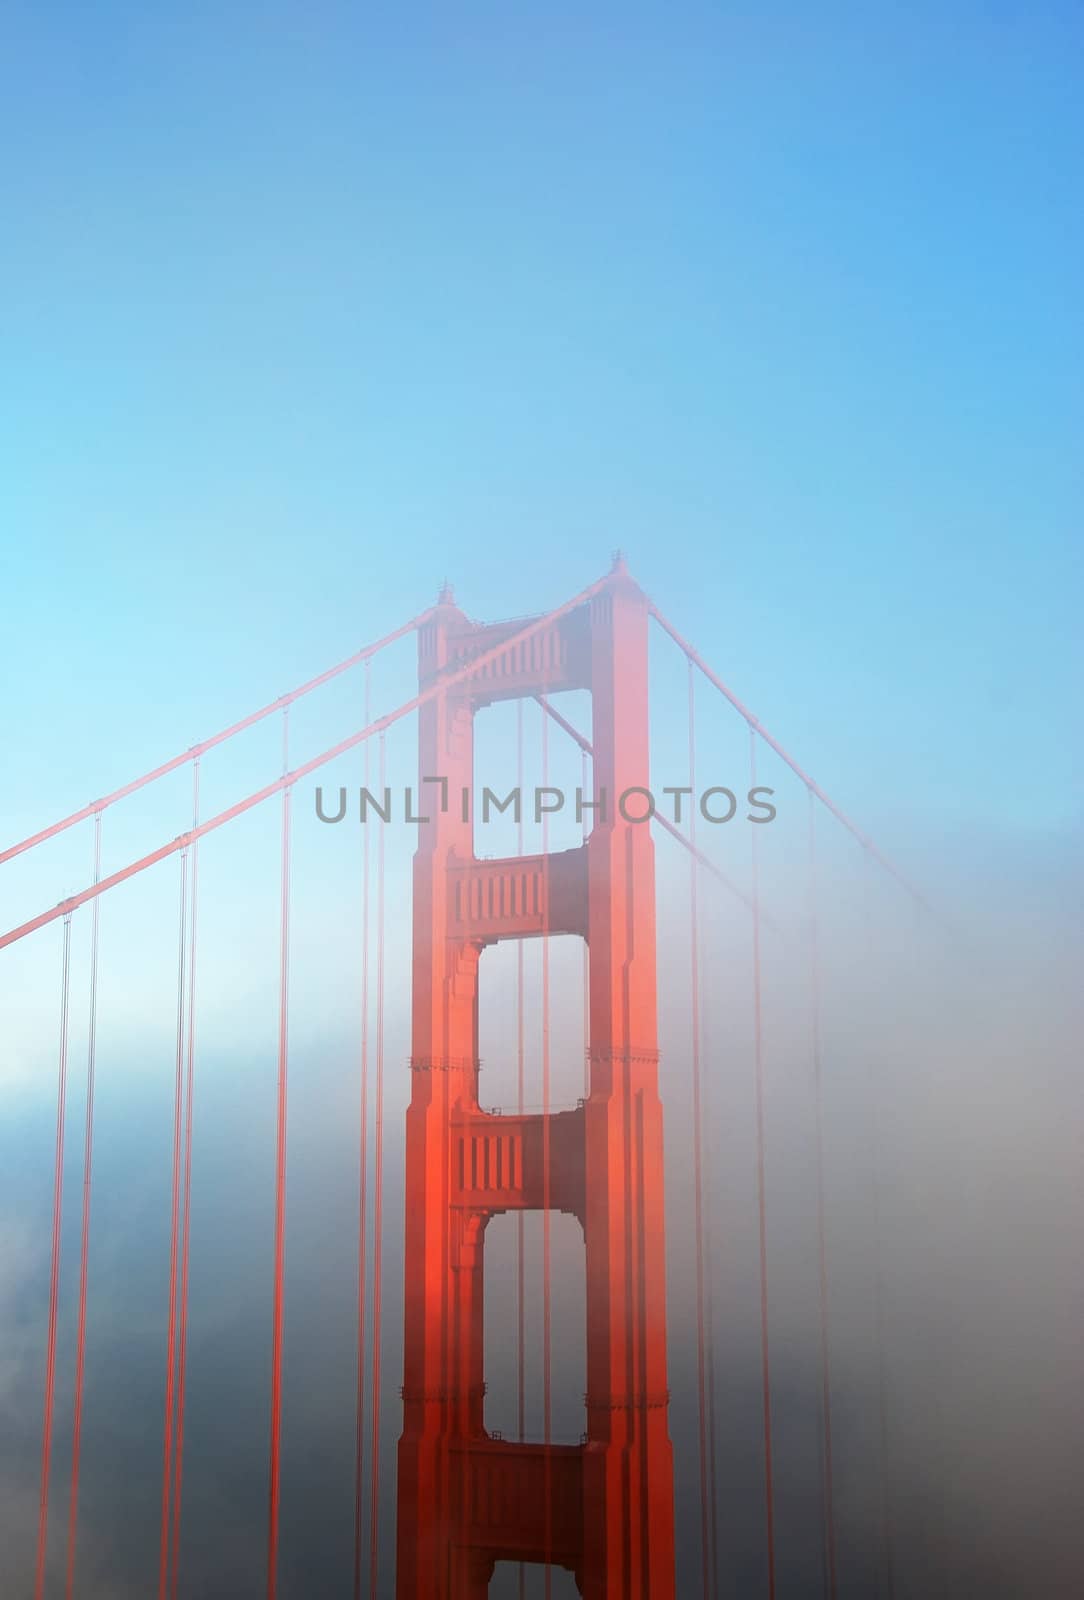 Detail of the Golden Gate Bridge in San Francisco on a foggy afternoon.